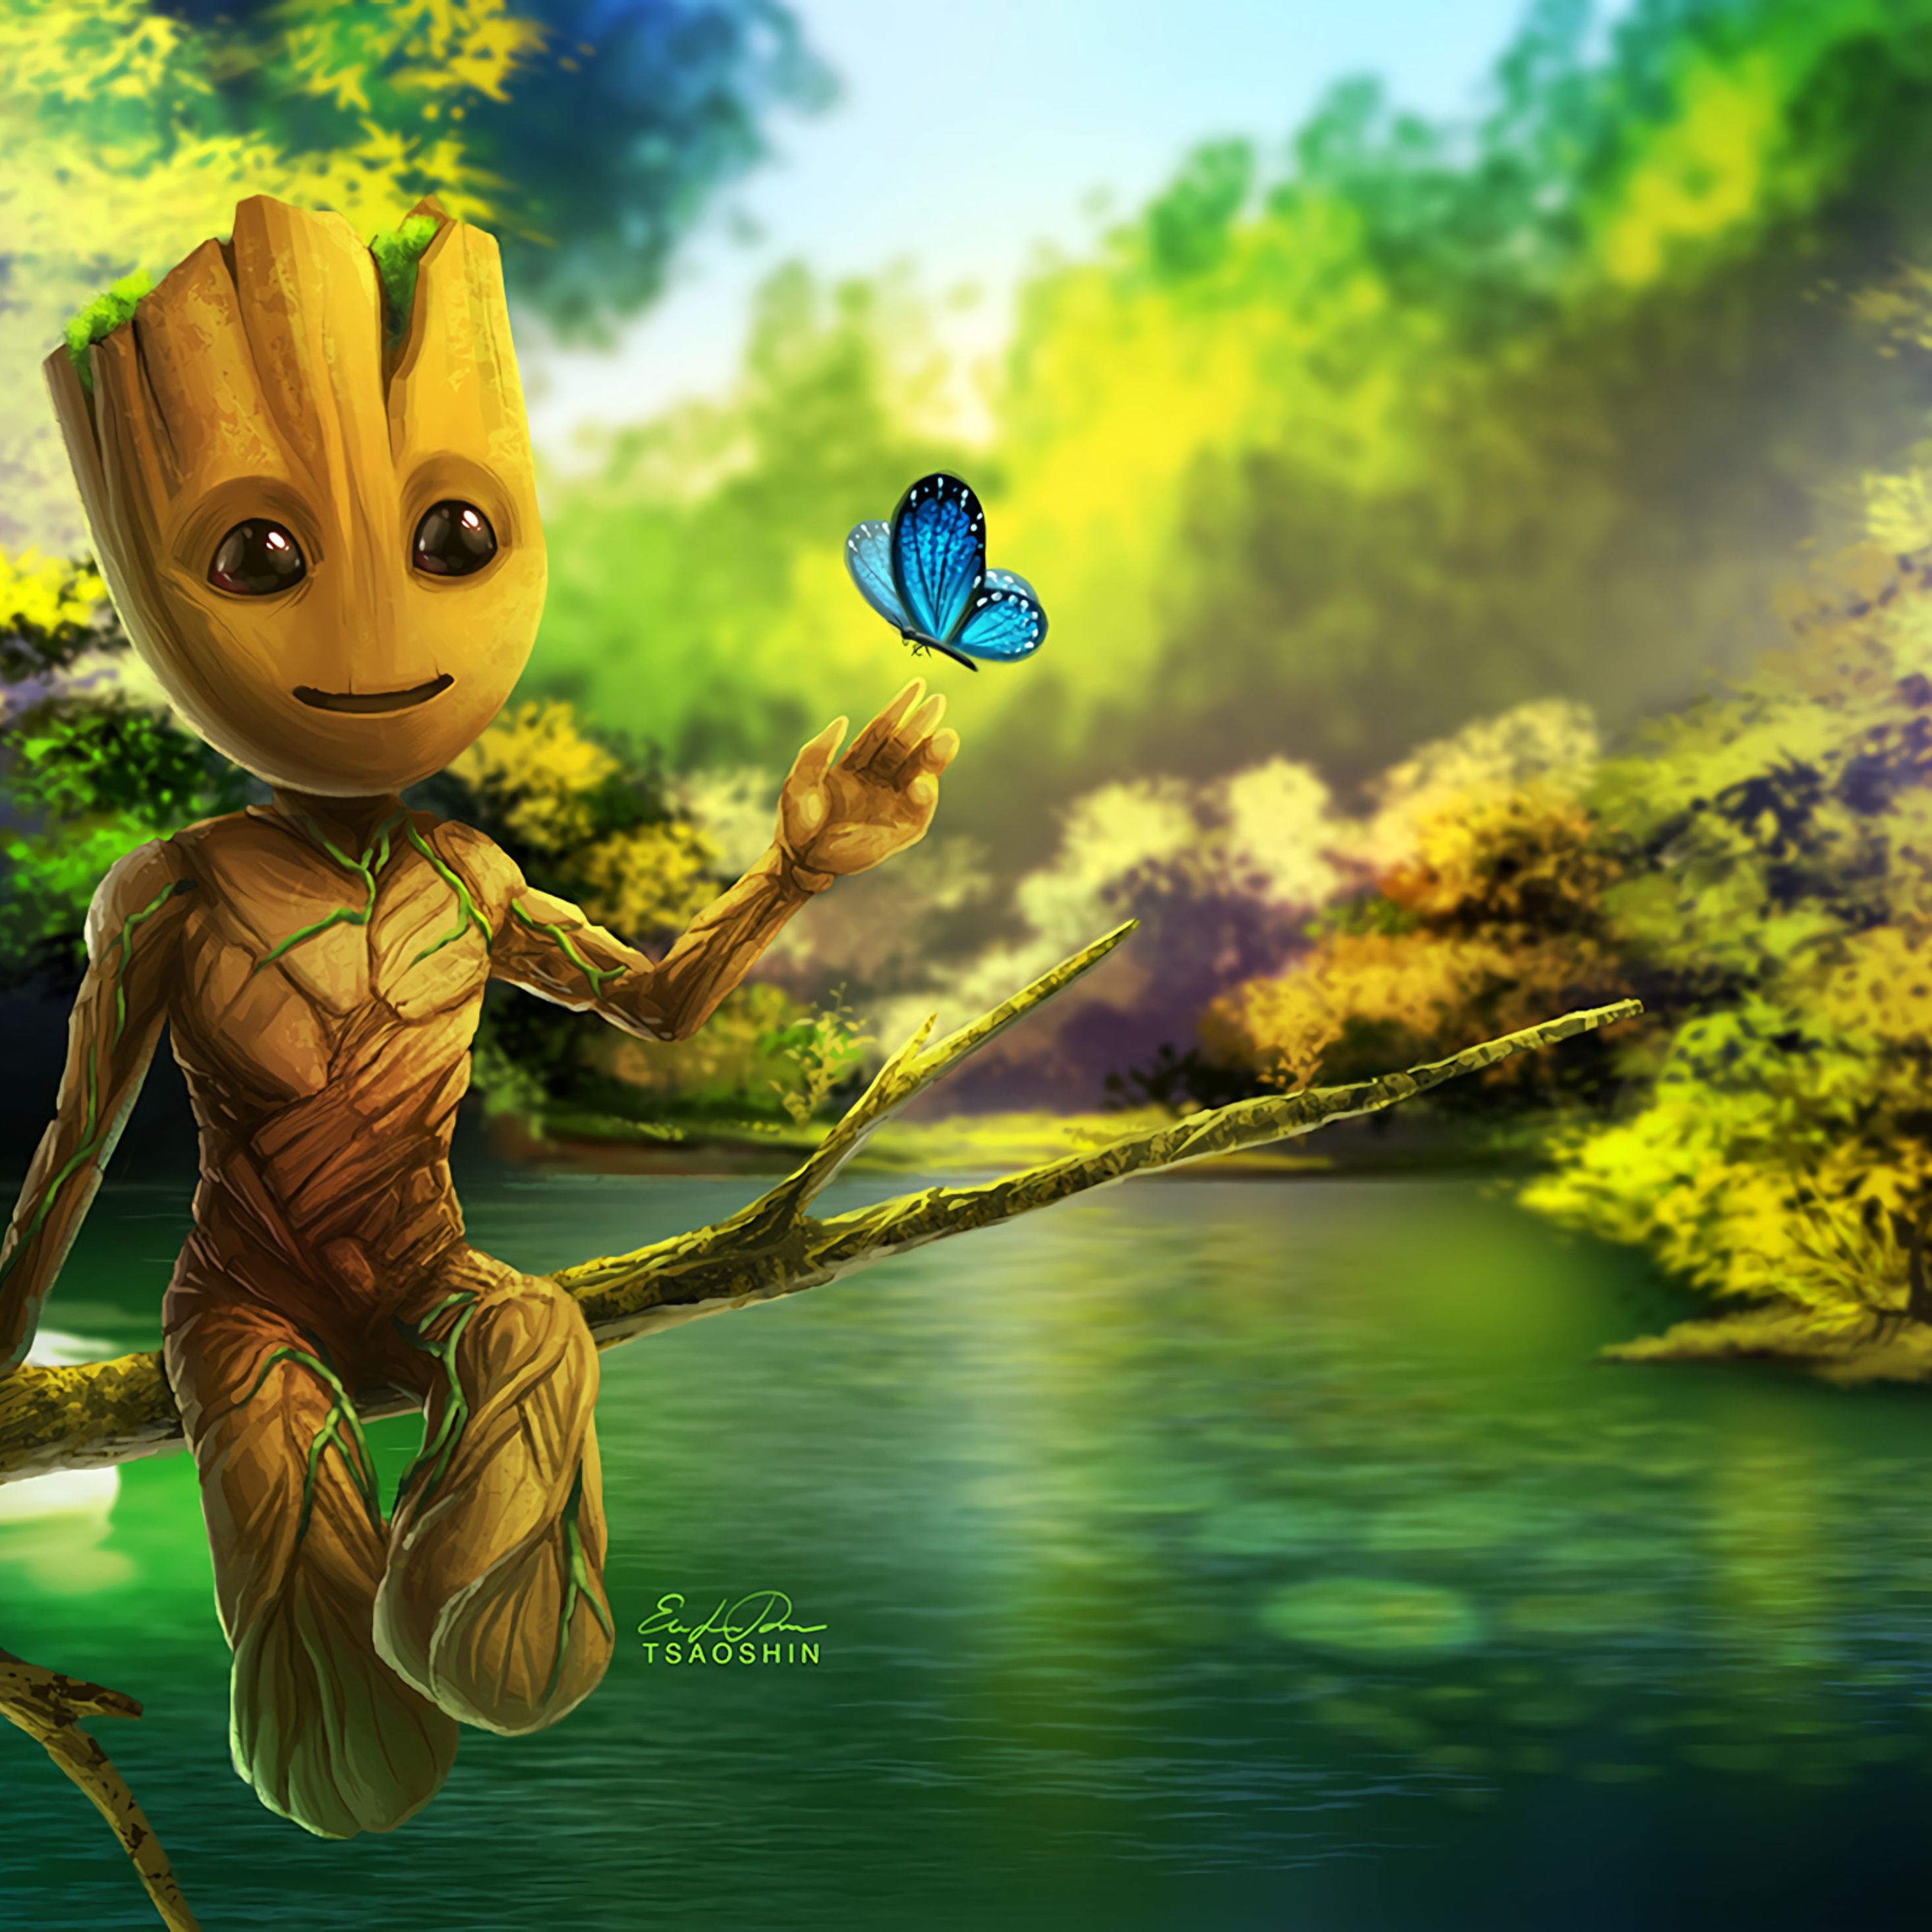 Baby Groot Artwork iPad Pro Retina Display HD 4k Wallpaper, Image, Background, Photo and Picture